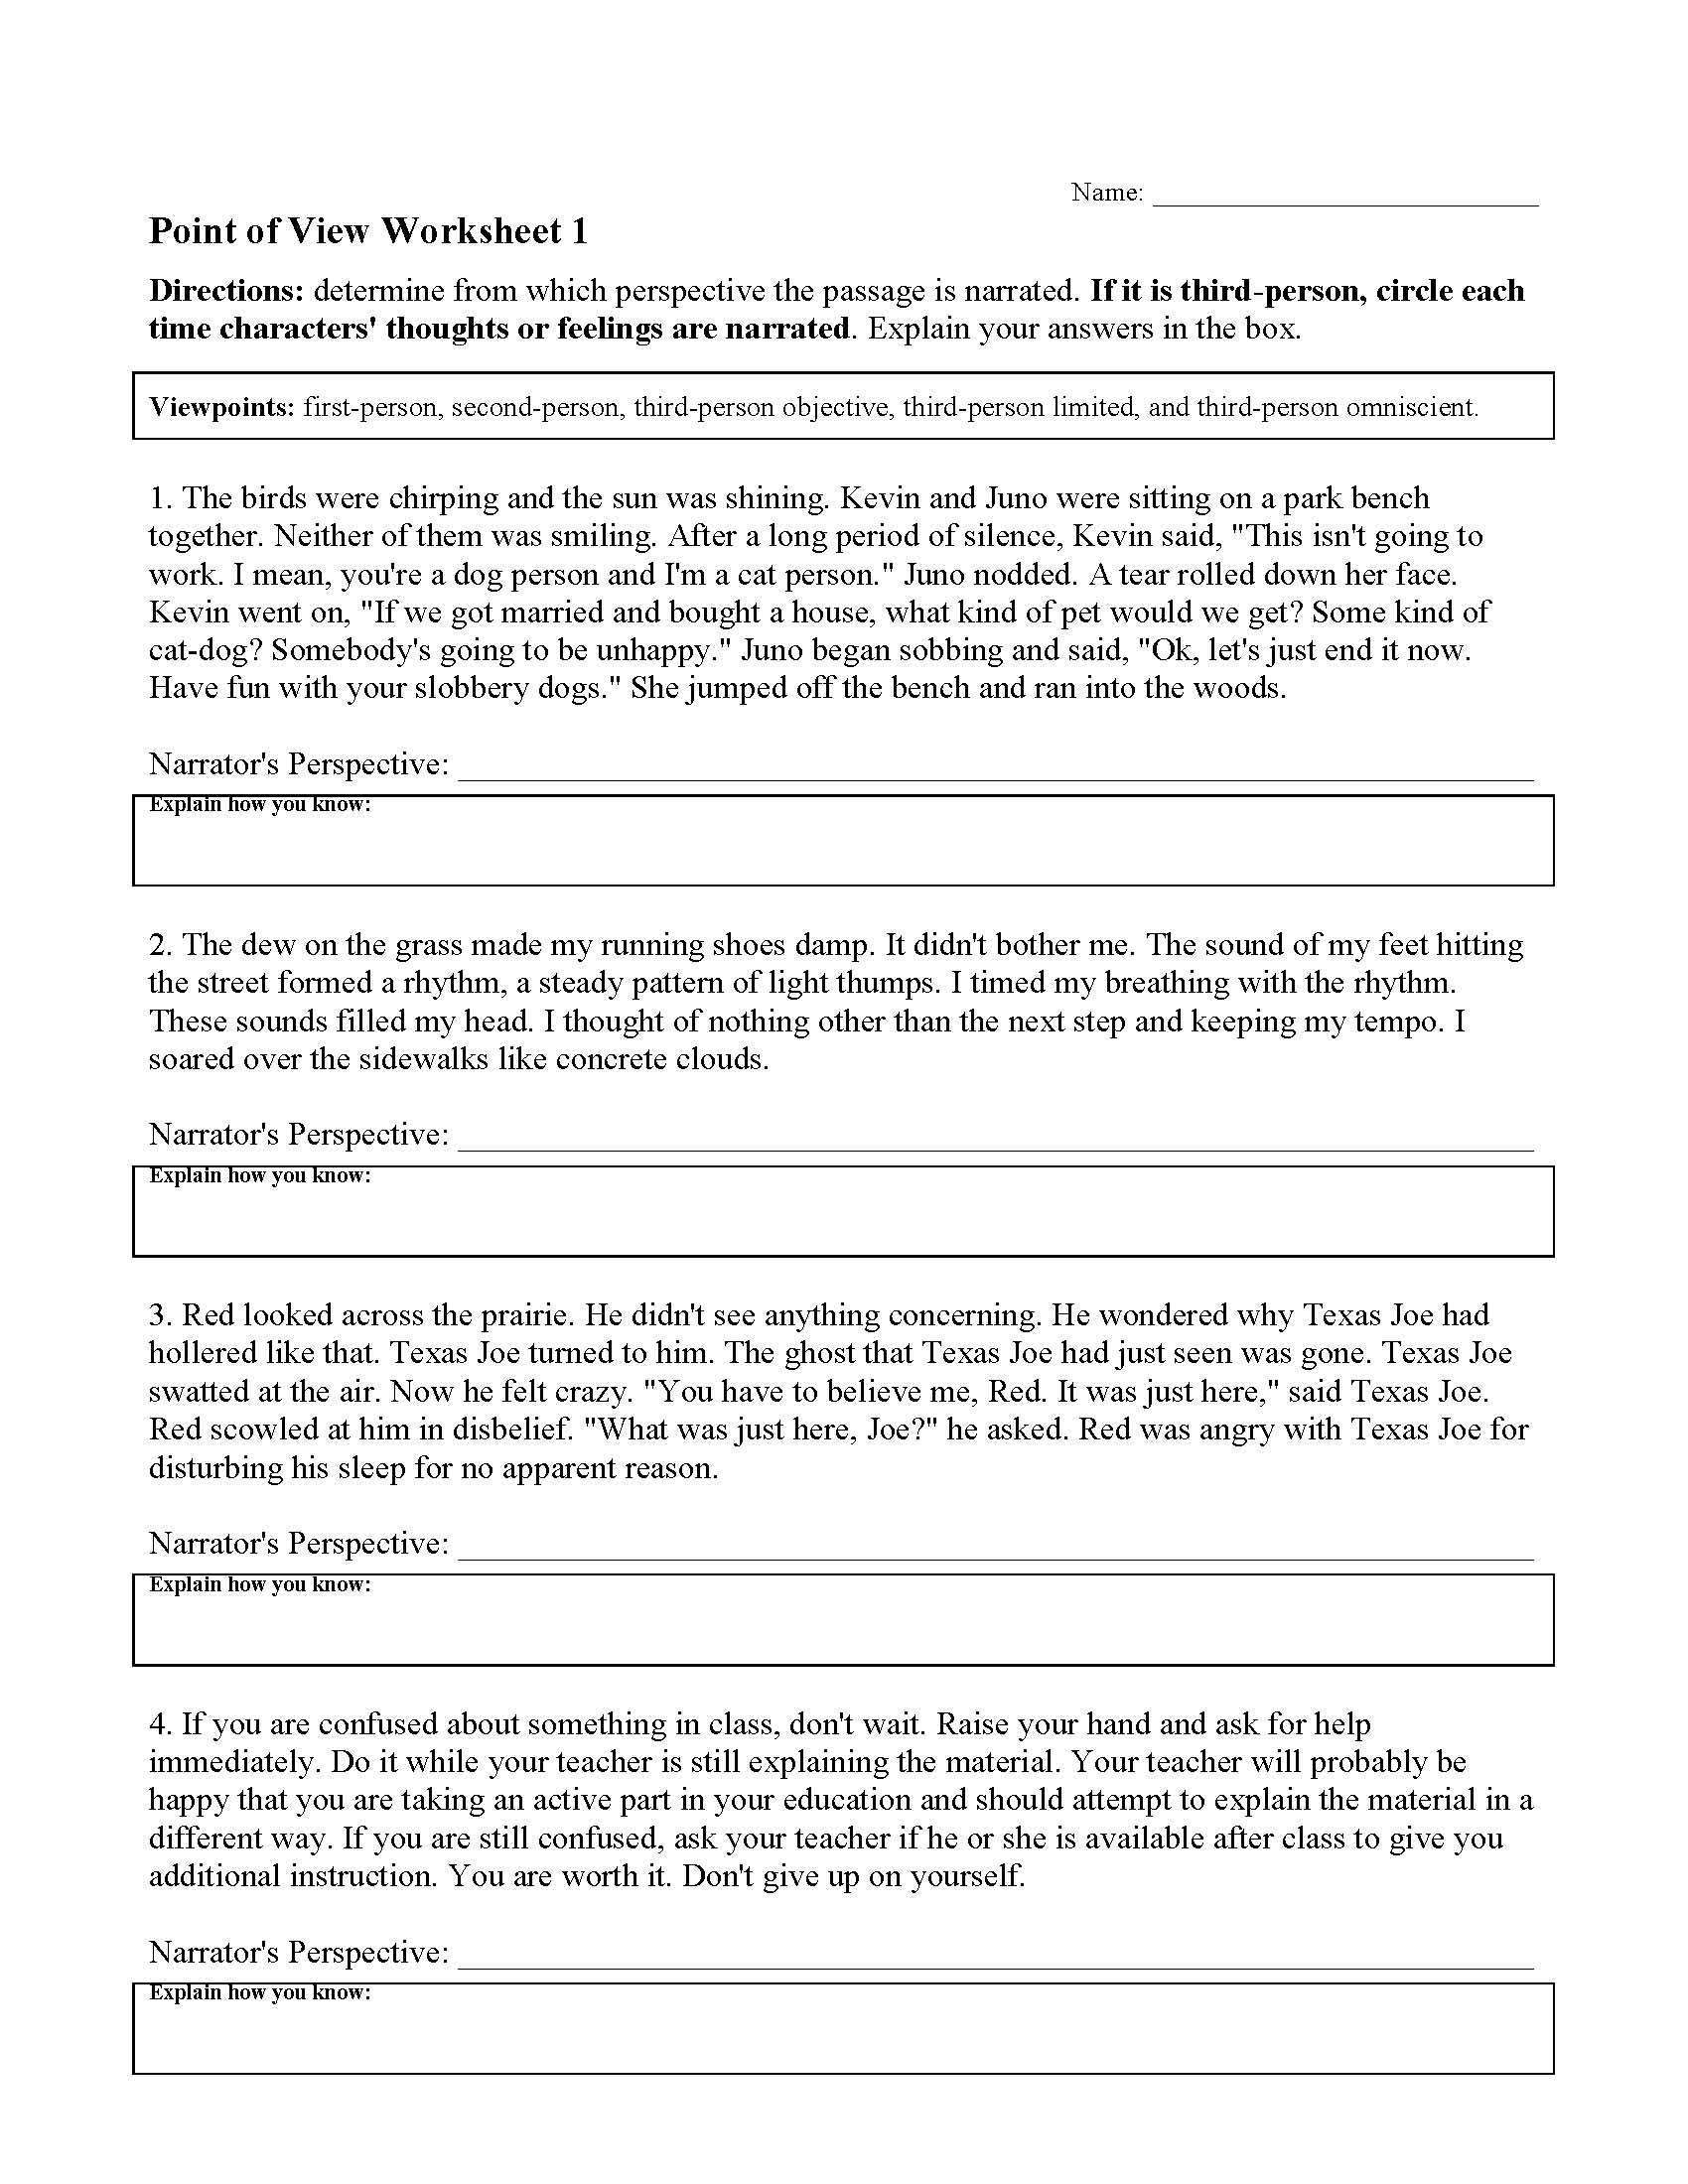 author-point-of-view-worksheet